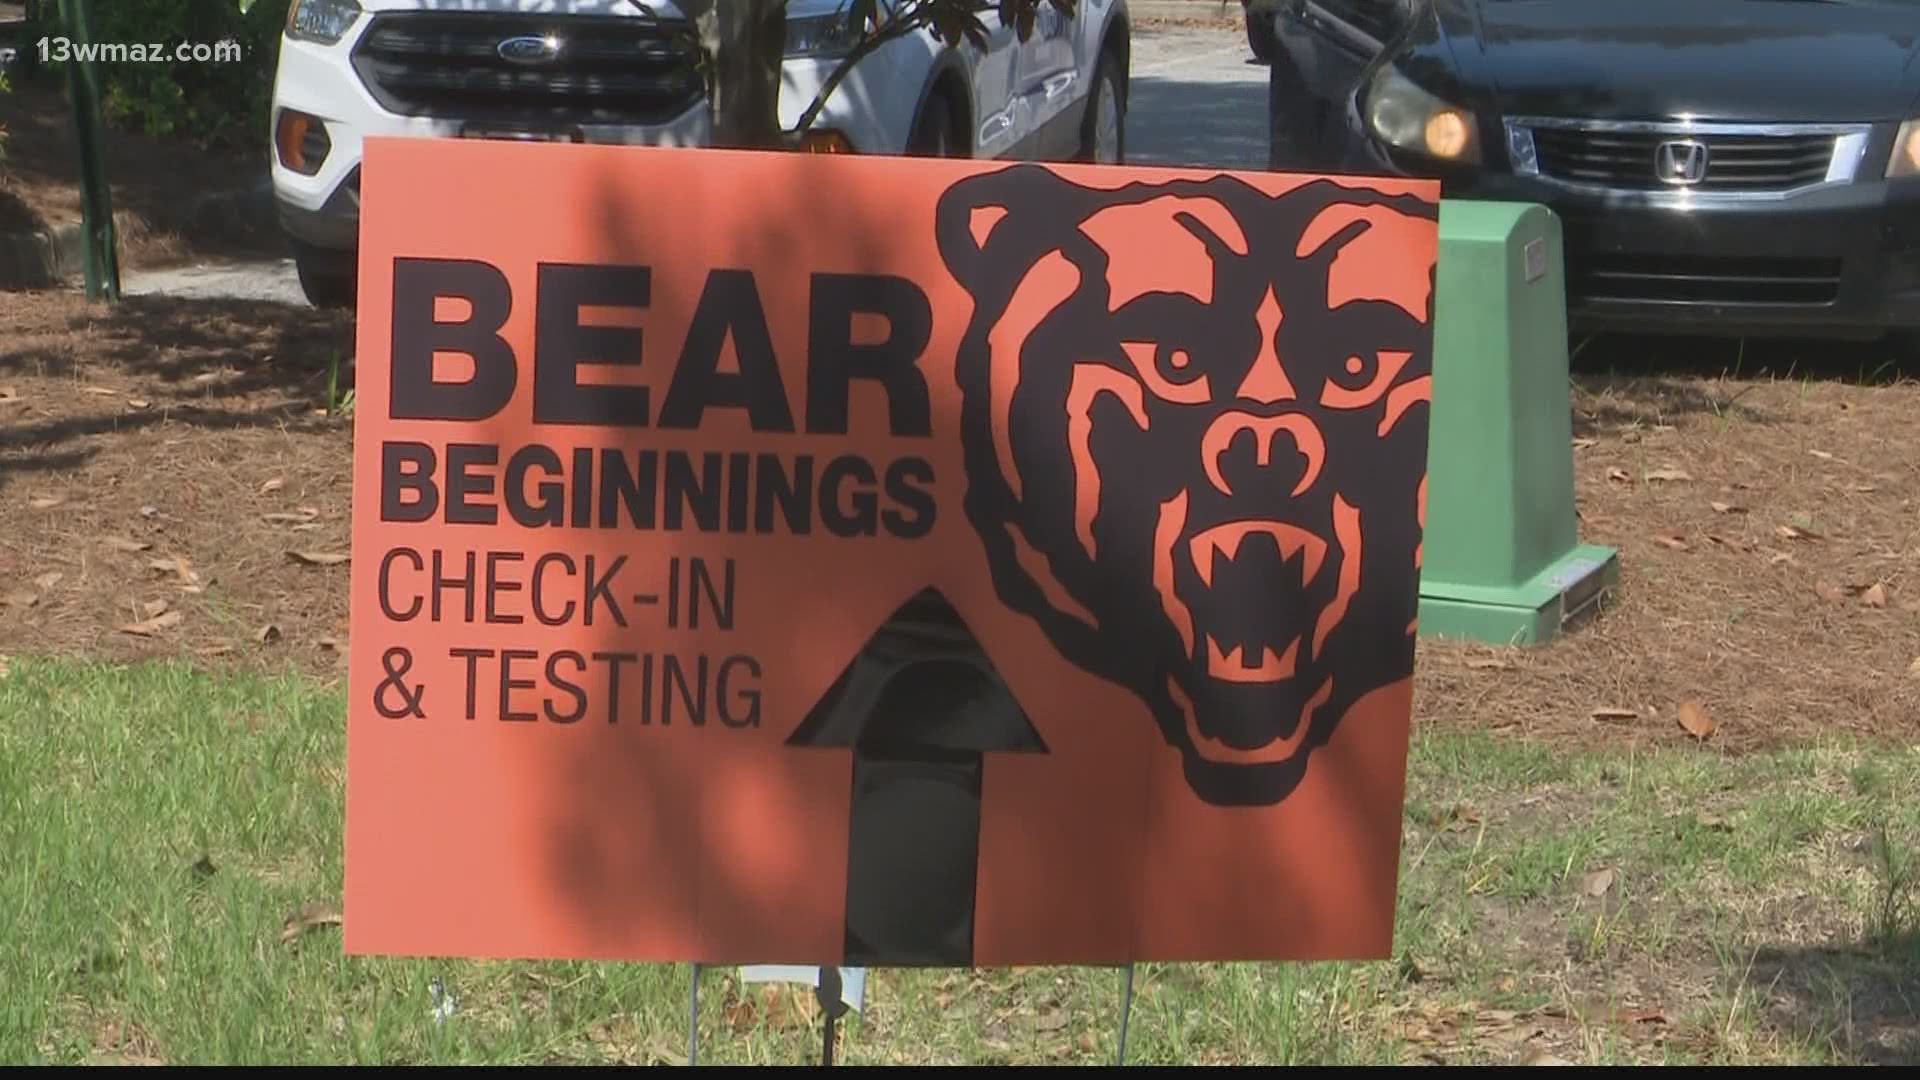 Move-in day for Mercer University looks different this year due to COVID-19. Here's what precautions the school will take to keep students safe.